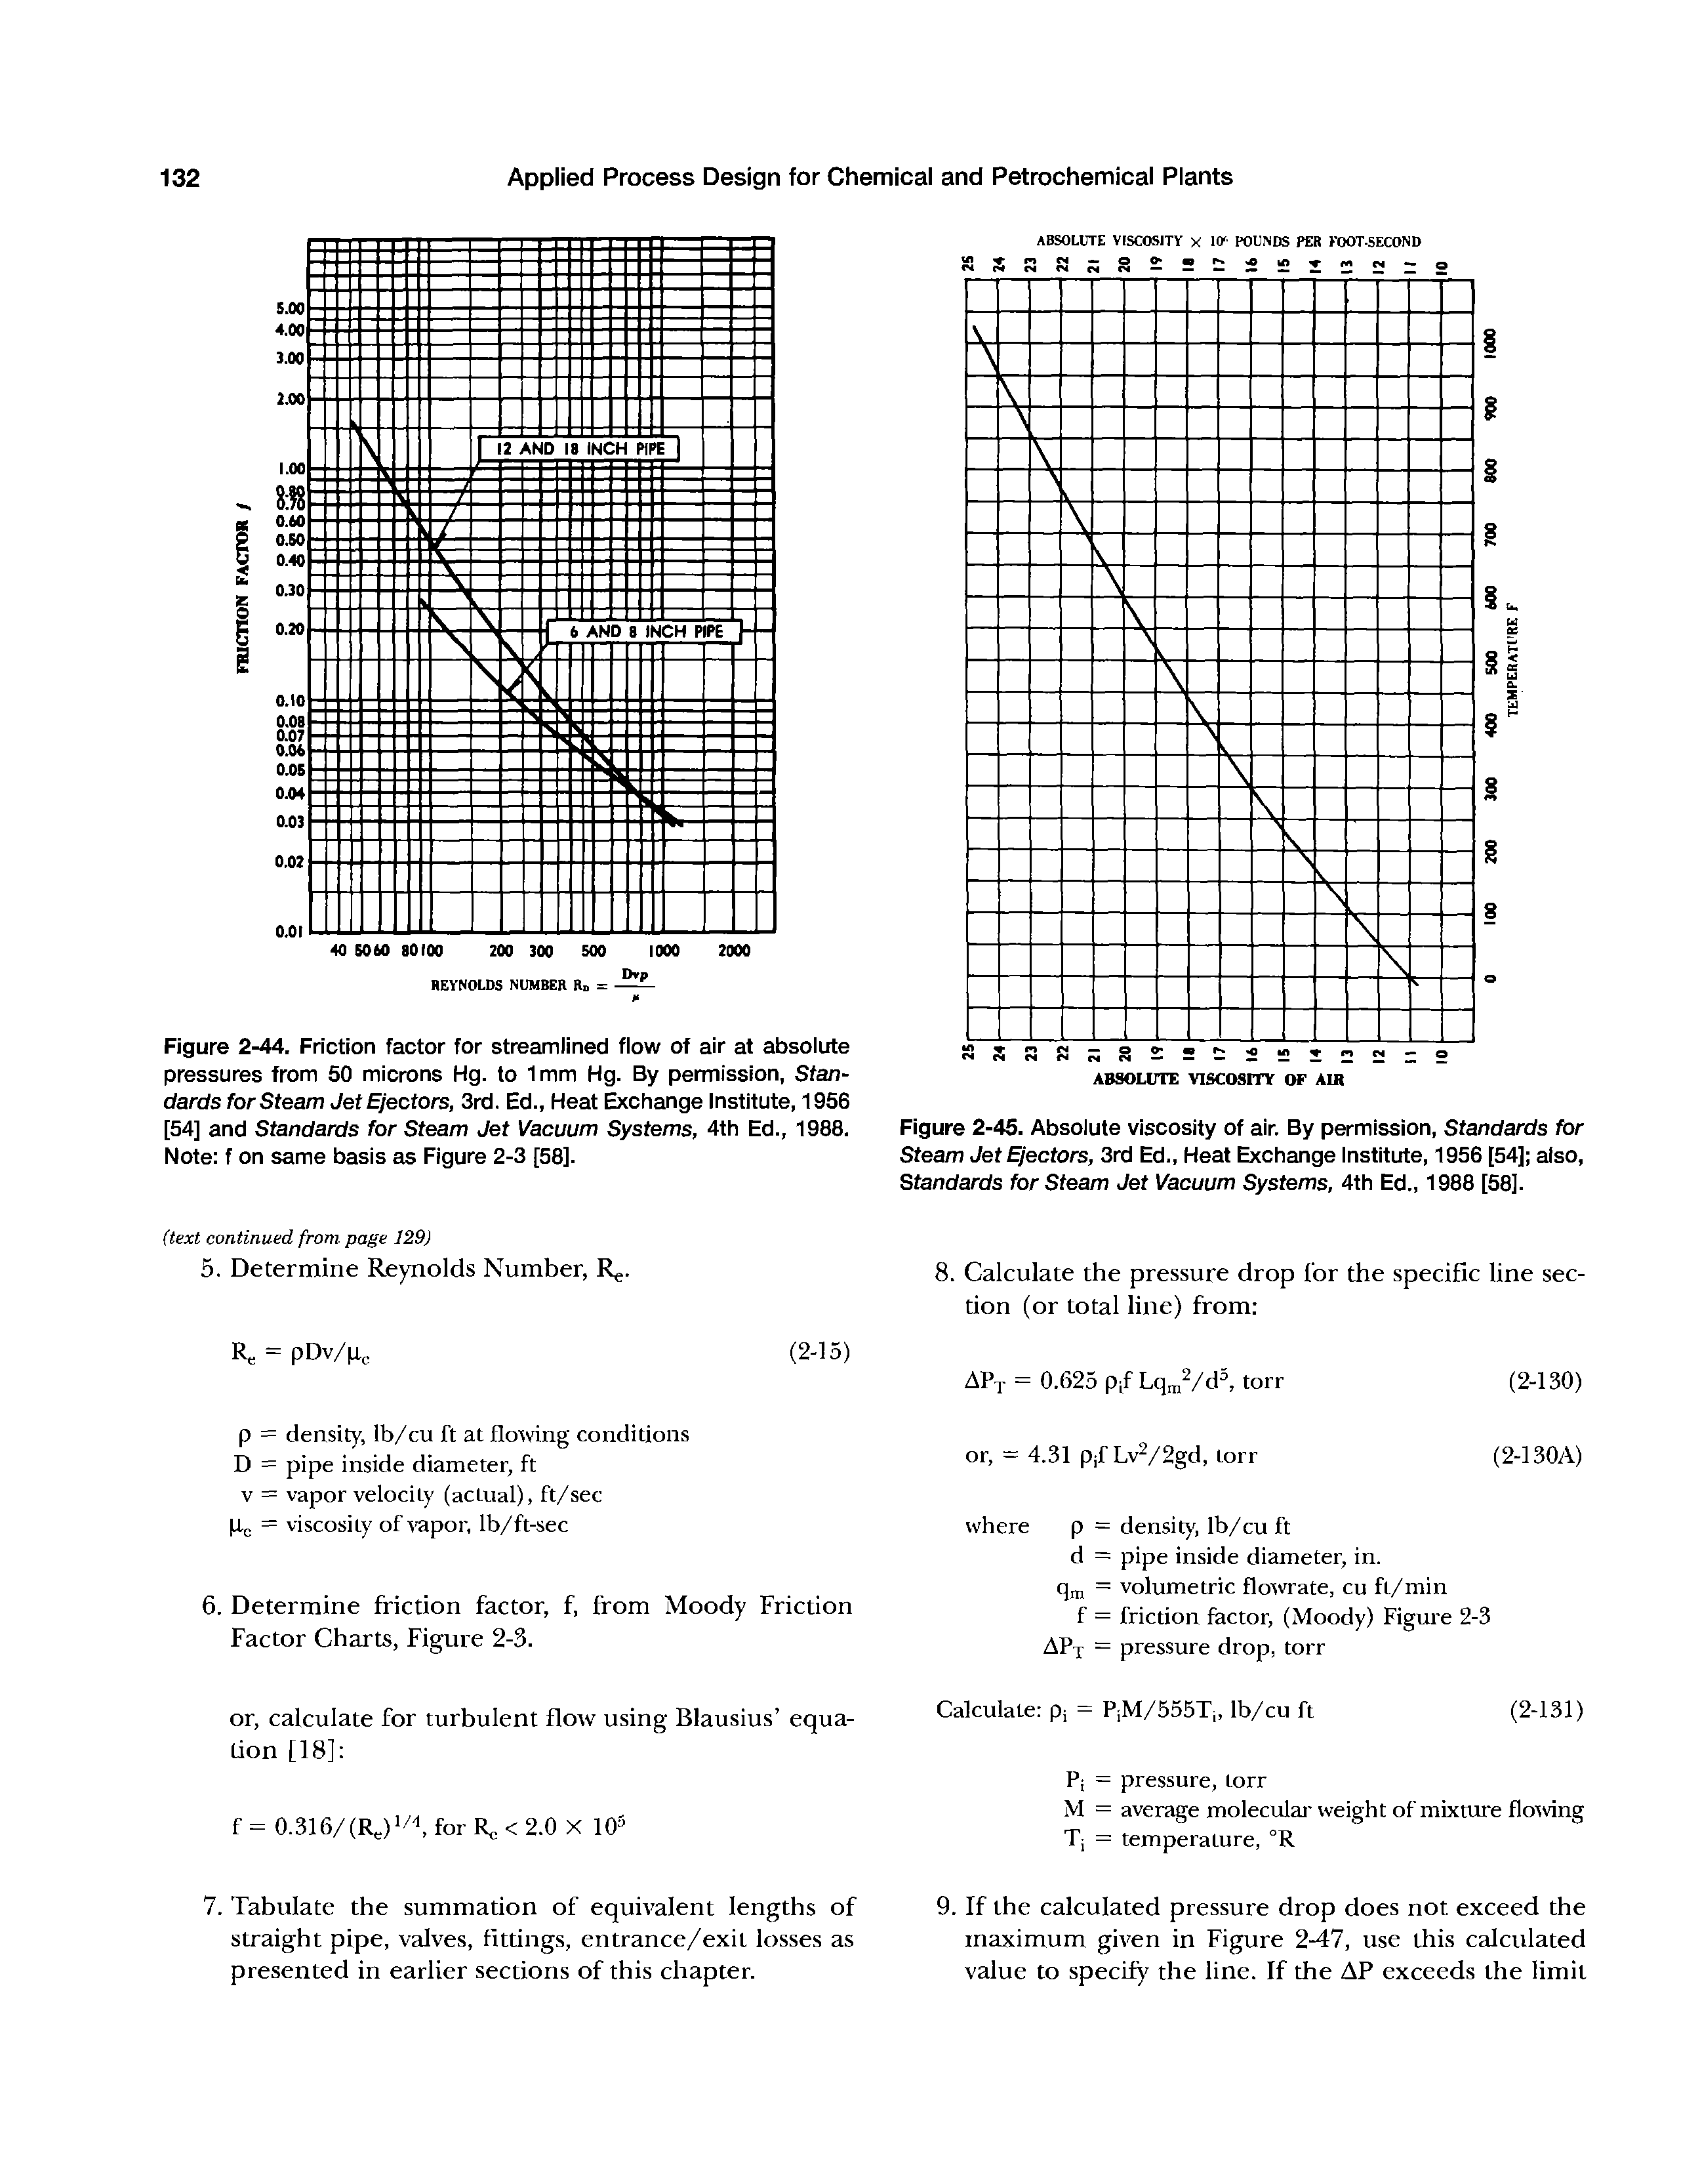 Figure 2-44. Friction factor for streamlined flow of air at absolute pressures from 50 microns Hg. to 1mm Hg. By permission, Standards for Steam Jet Ejectors, 3rd. Ed., Heat Exchange Institute, 1956 [54] and Standards for Steam Jet Vacuum Systems, 4th Ed., 1988. Note f on same basis as Figure 2-3 [58].